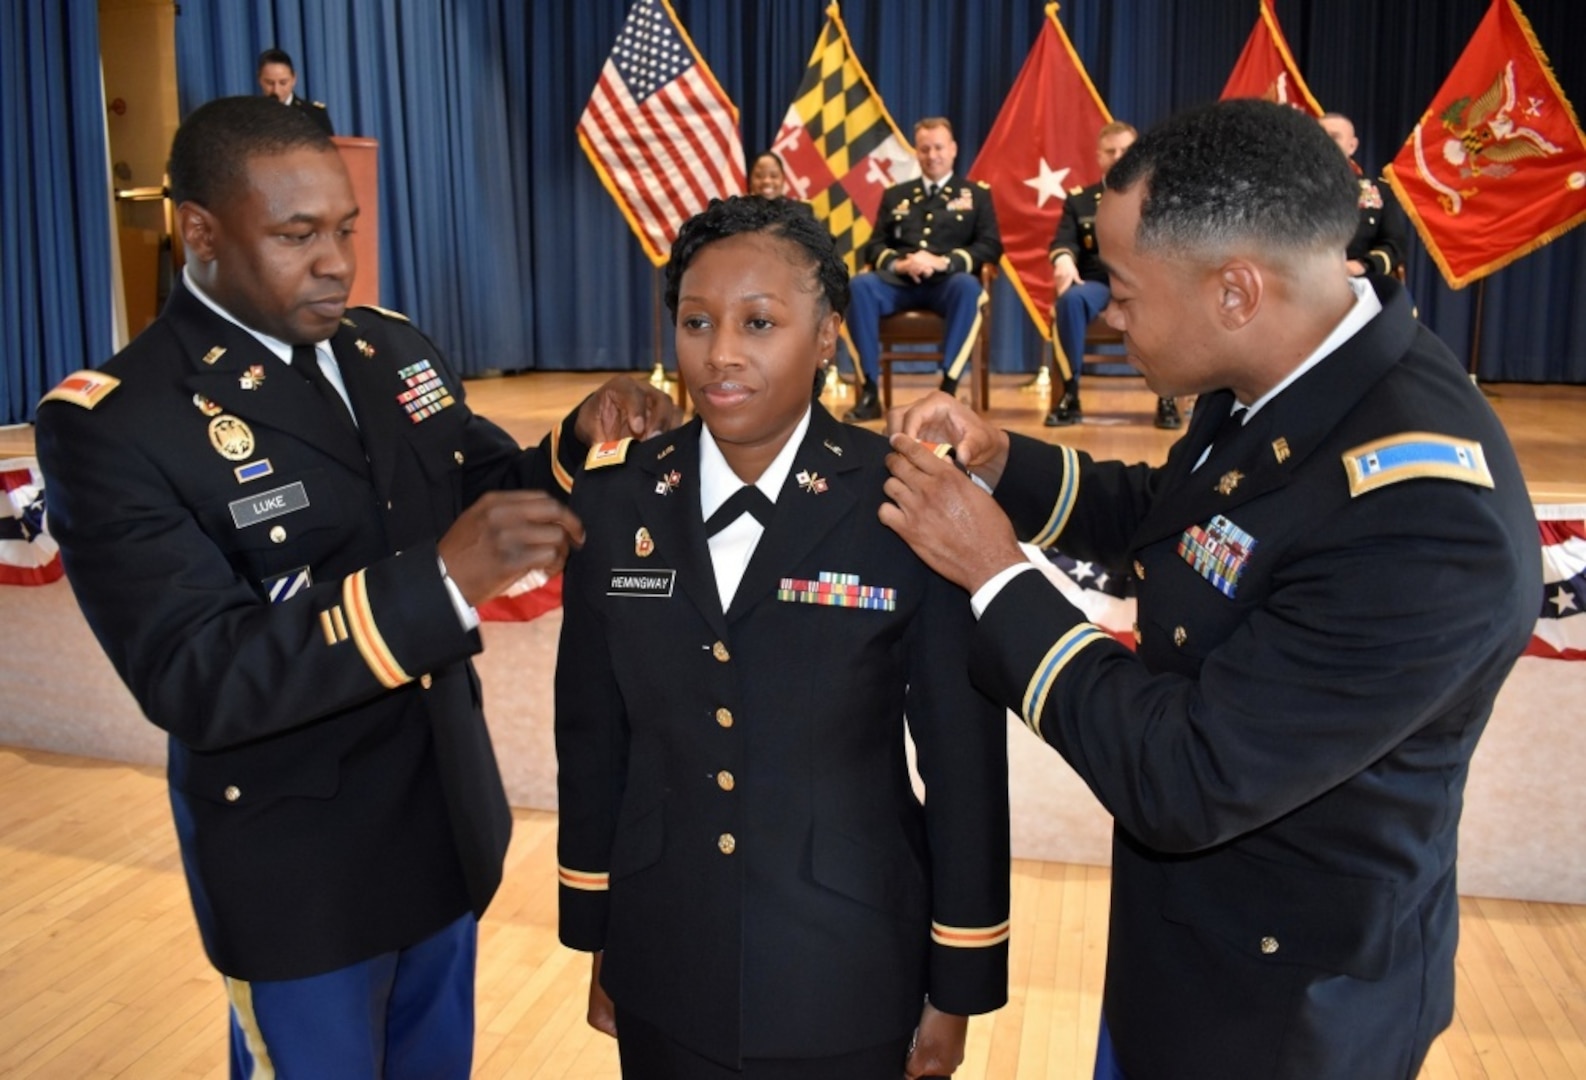 Warrant Officer Karinn Hemingway, a 110th Information Operations Battalion information services technician, commissions as Maryland Army National Guard warrant officer during graduation and pinning ceremony hosted by the 70th Regional Training Institute on Oct. 19, 2019